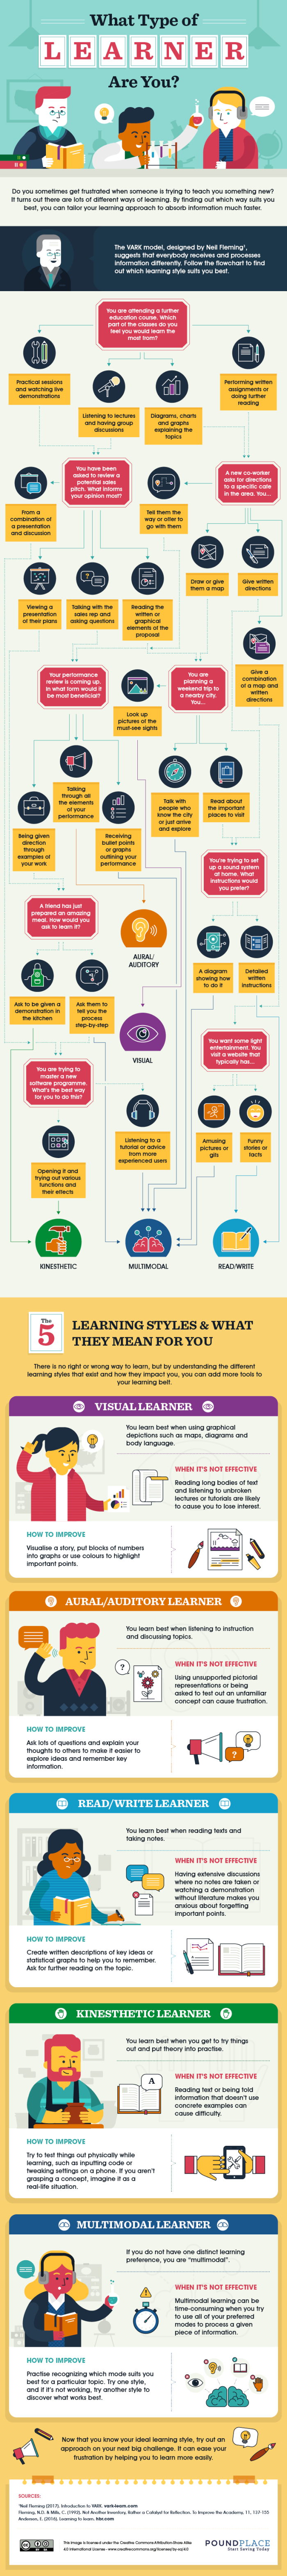 What Type of Learner are You Infographic